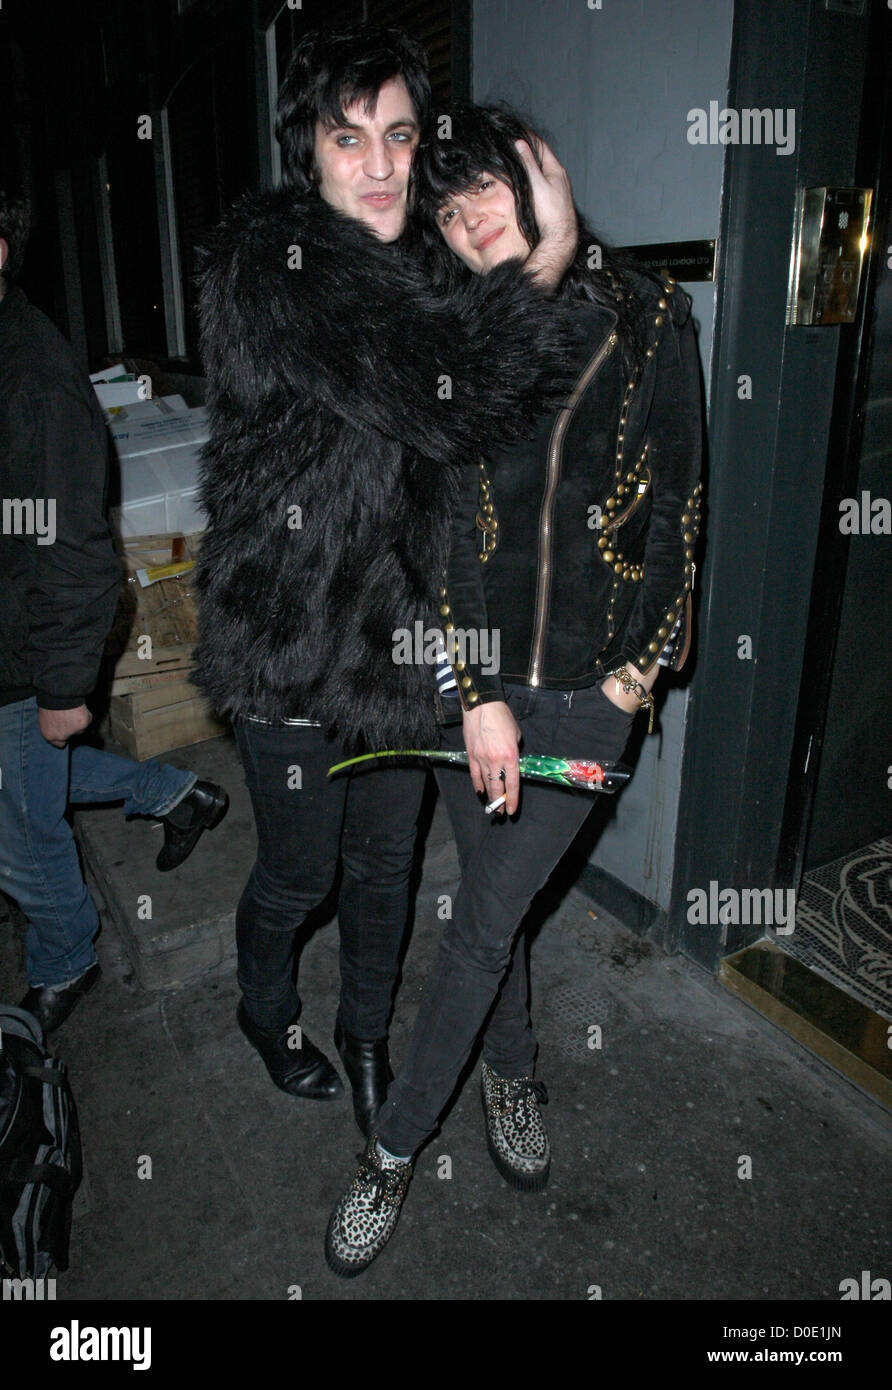 Noel Fielding and Alison Mosshart outside the Groucho club. London, England - 28.10.10 Stock Photo